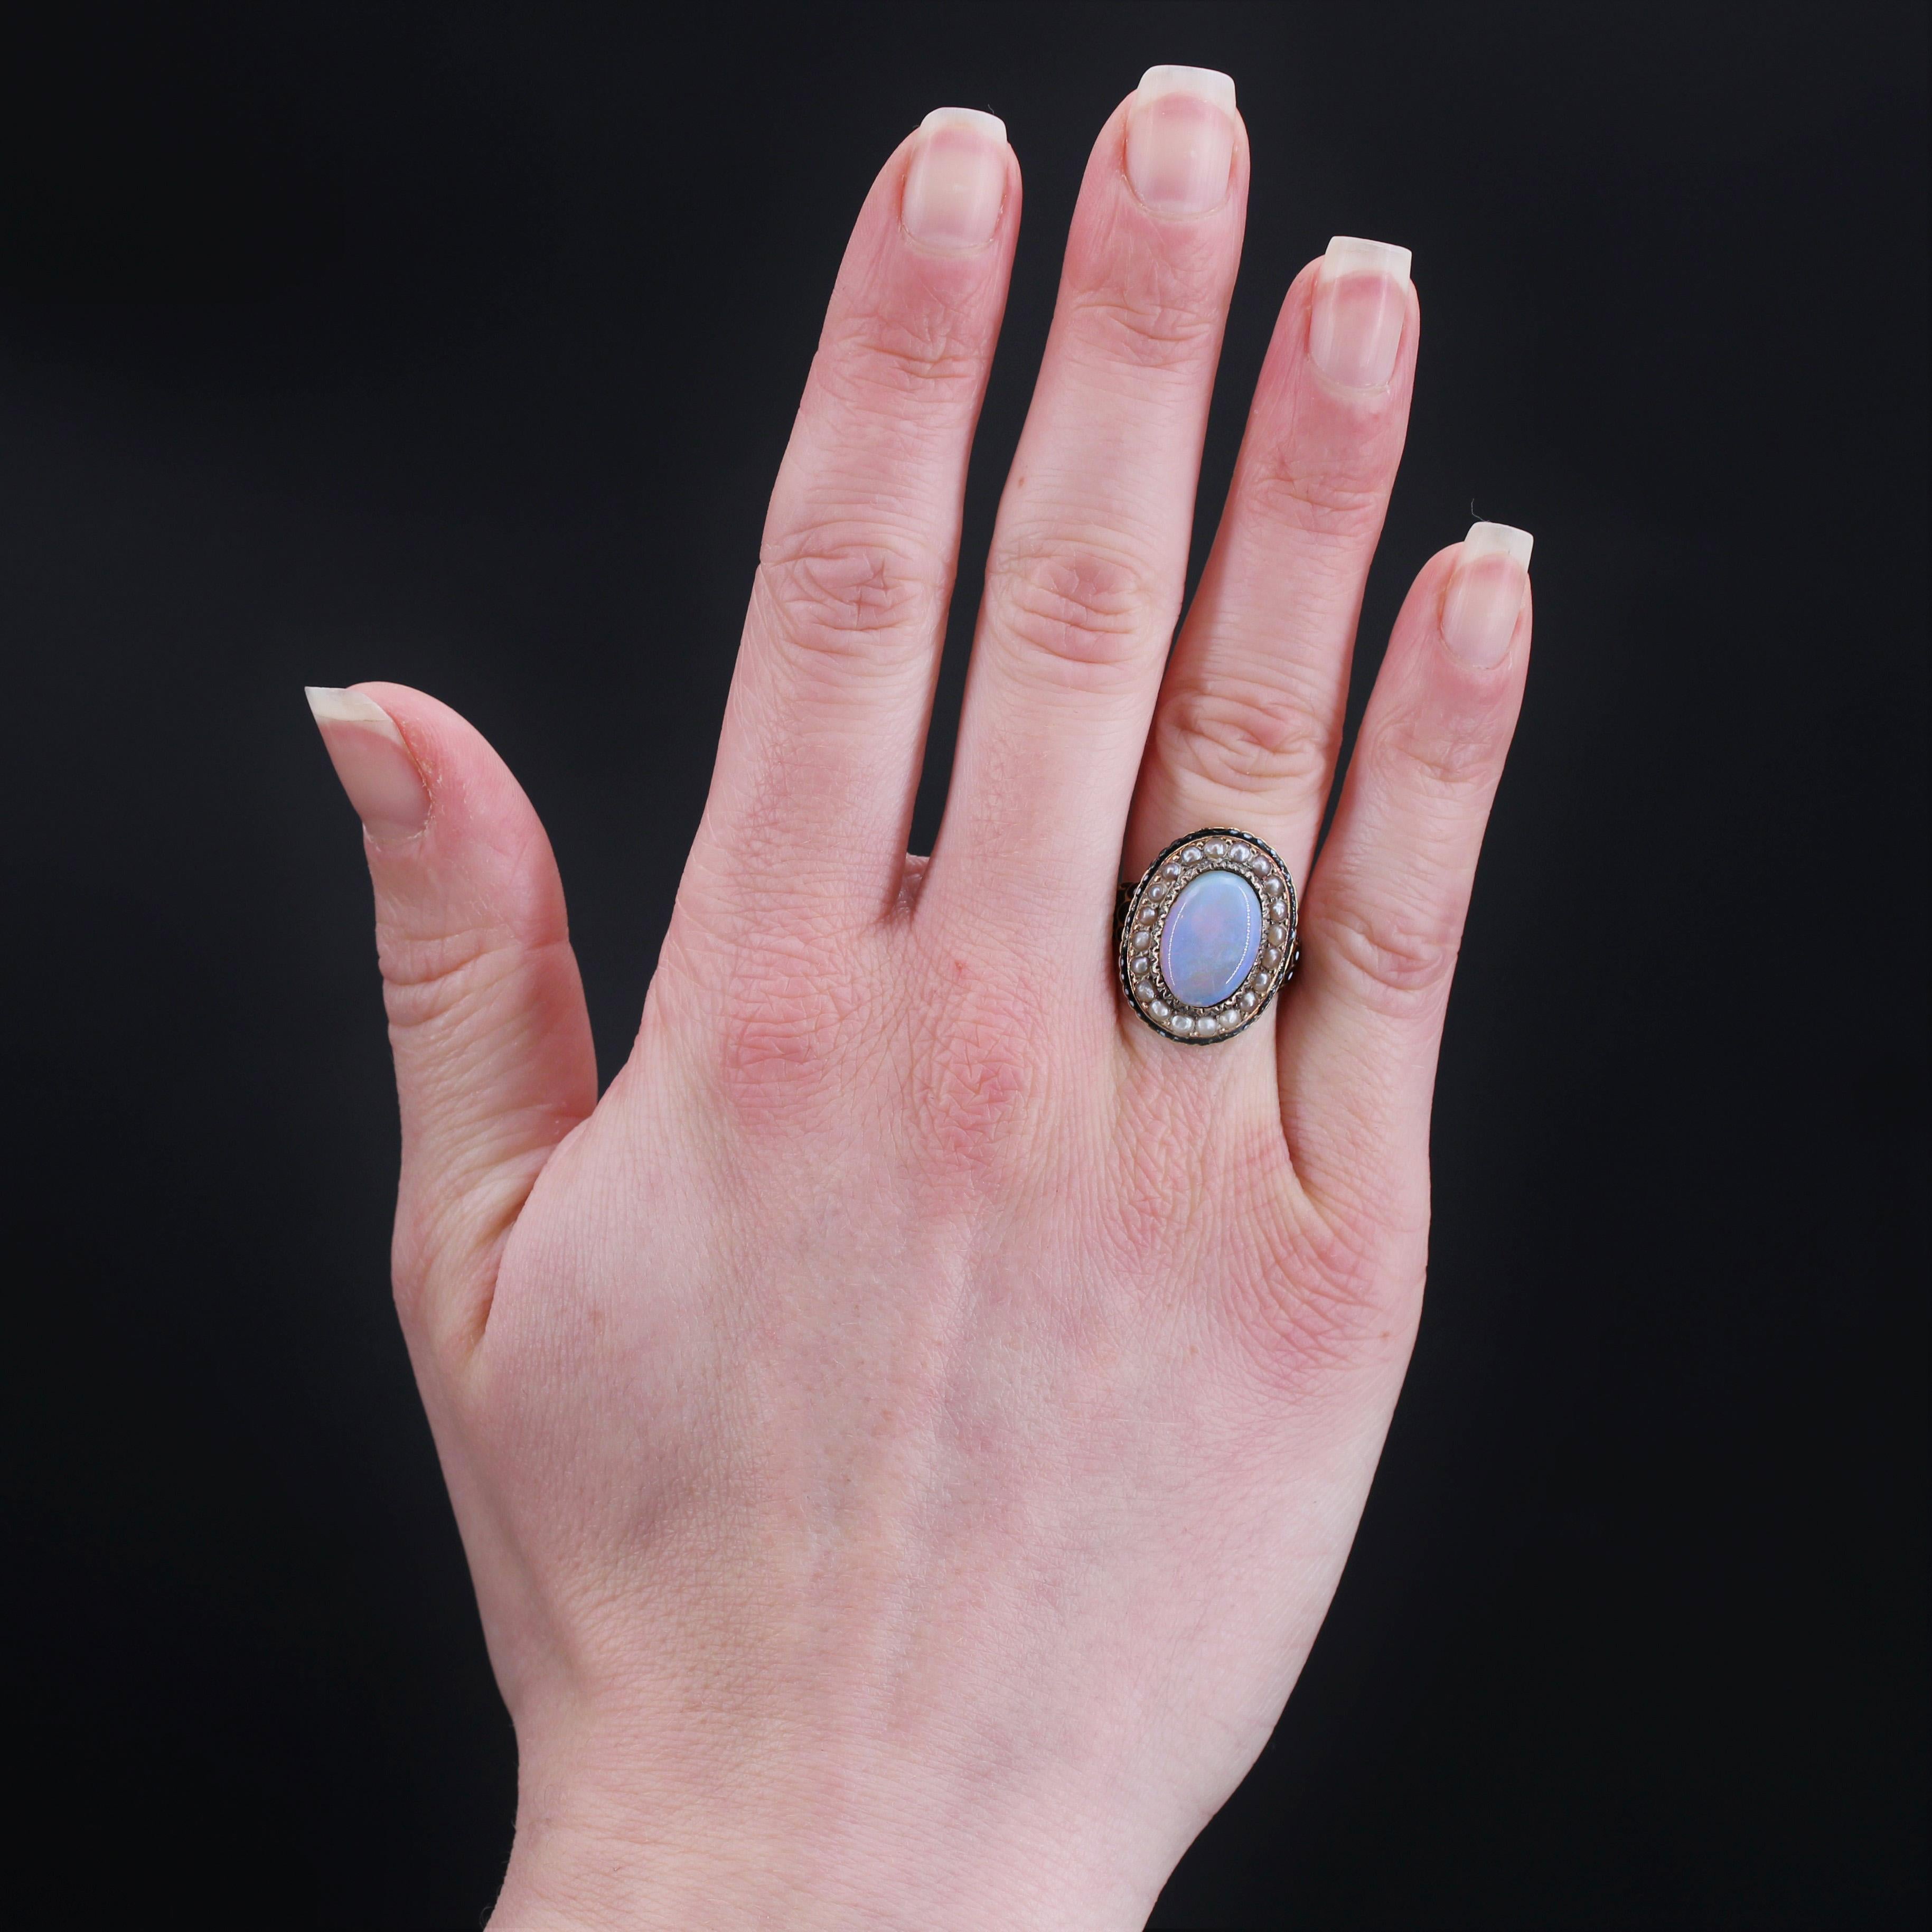 Ring in 18 karat yellow gold, own hallmark.
Beautiful and rare antique ring, it is decorated with an opal cabochon in the center of a chased decoration, surrounded by half fine pearls and a border of black and white enamel. The start of the ring is